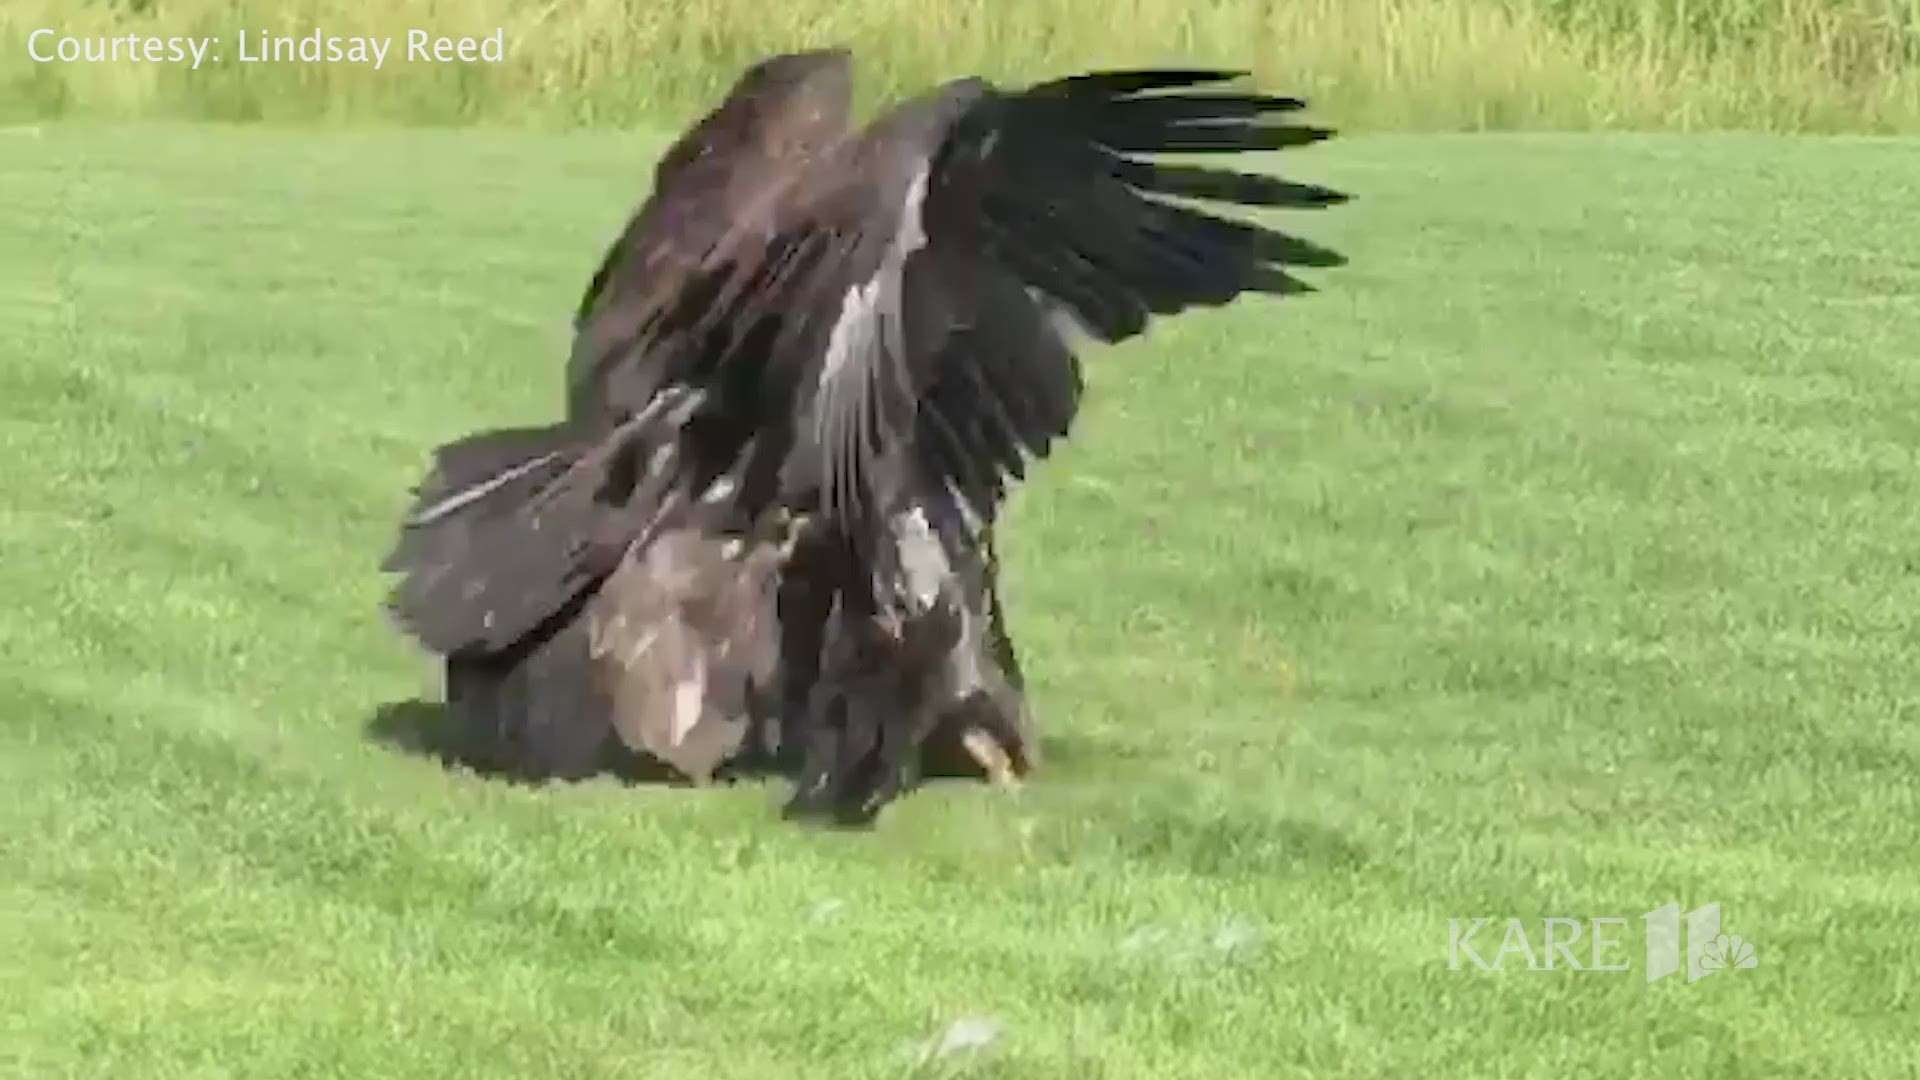 Lindsey Reed from Woodbury shared this stunning footage of eagles fighting in her backyard.